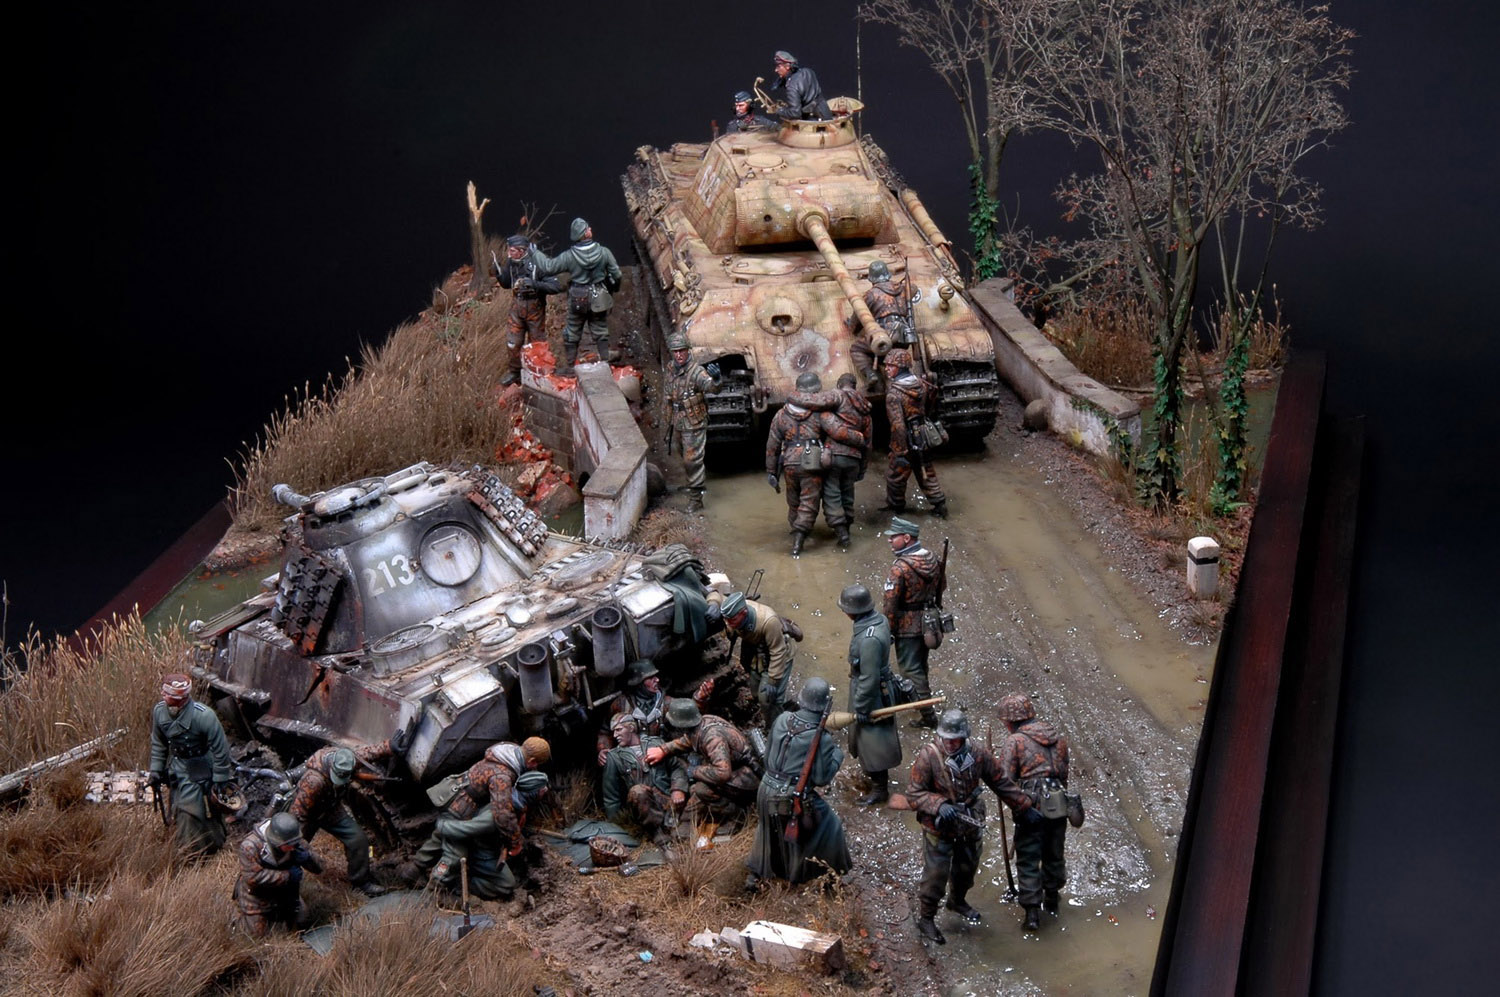 The Diorama Perfection